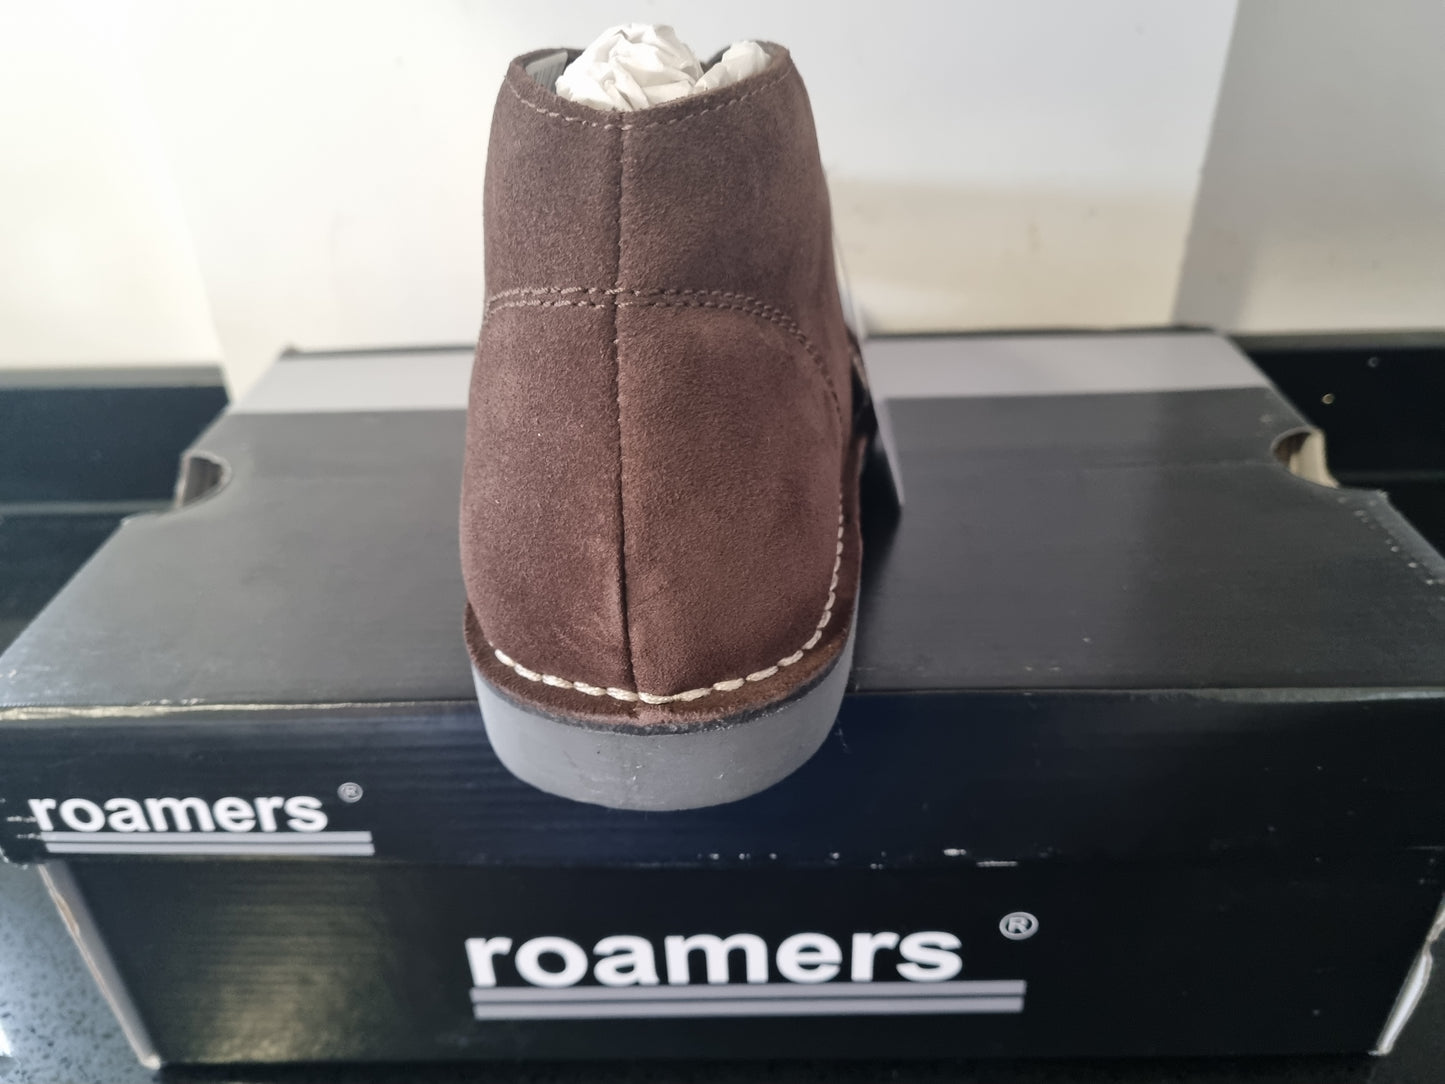 Desert Boot by Roamers - Slim Fit - 2 Eye Sand Chocolate Leather (M420DBS)